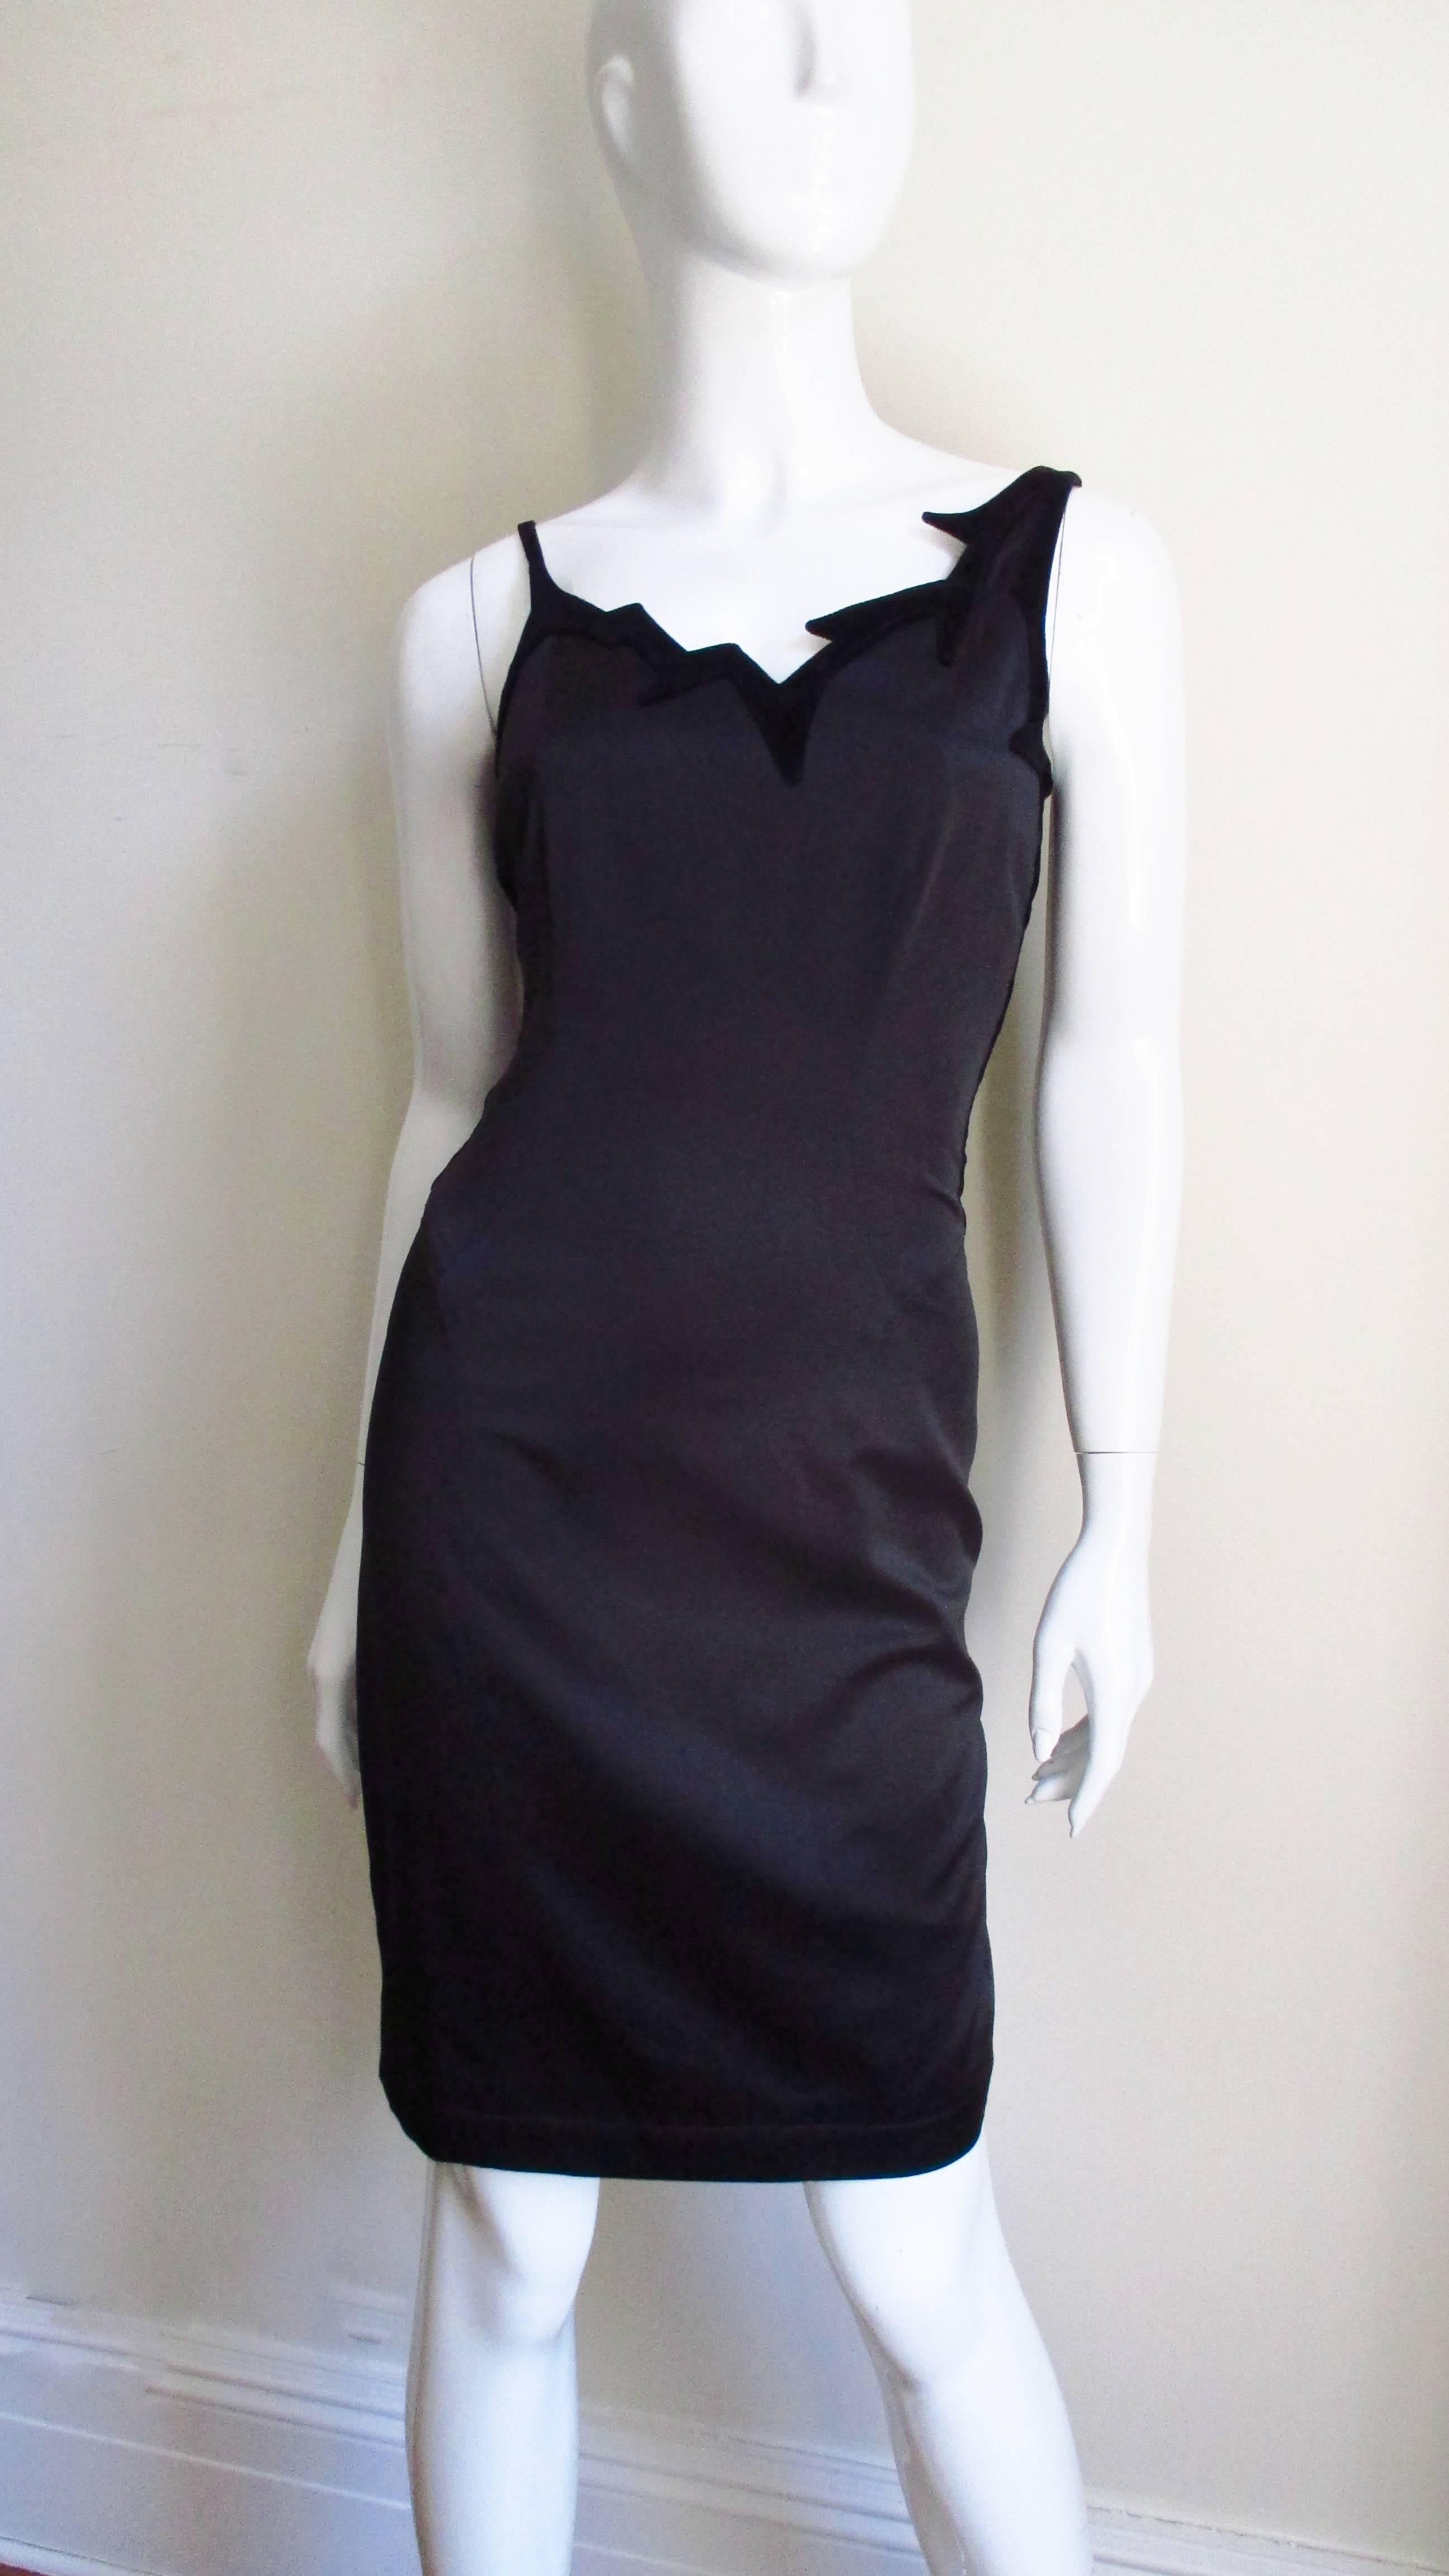 Thierry Mugler Silk Dress with Asymmetric Neckline In Good Condition For Sale In Water Mill, NY